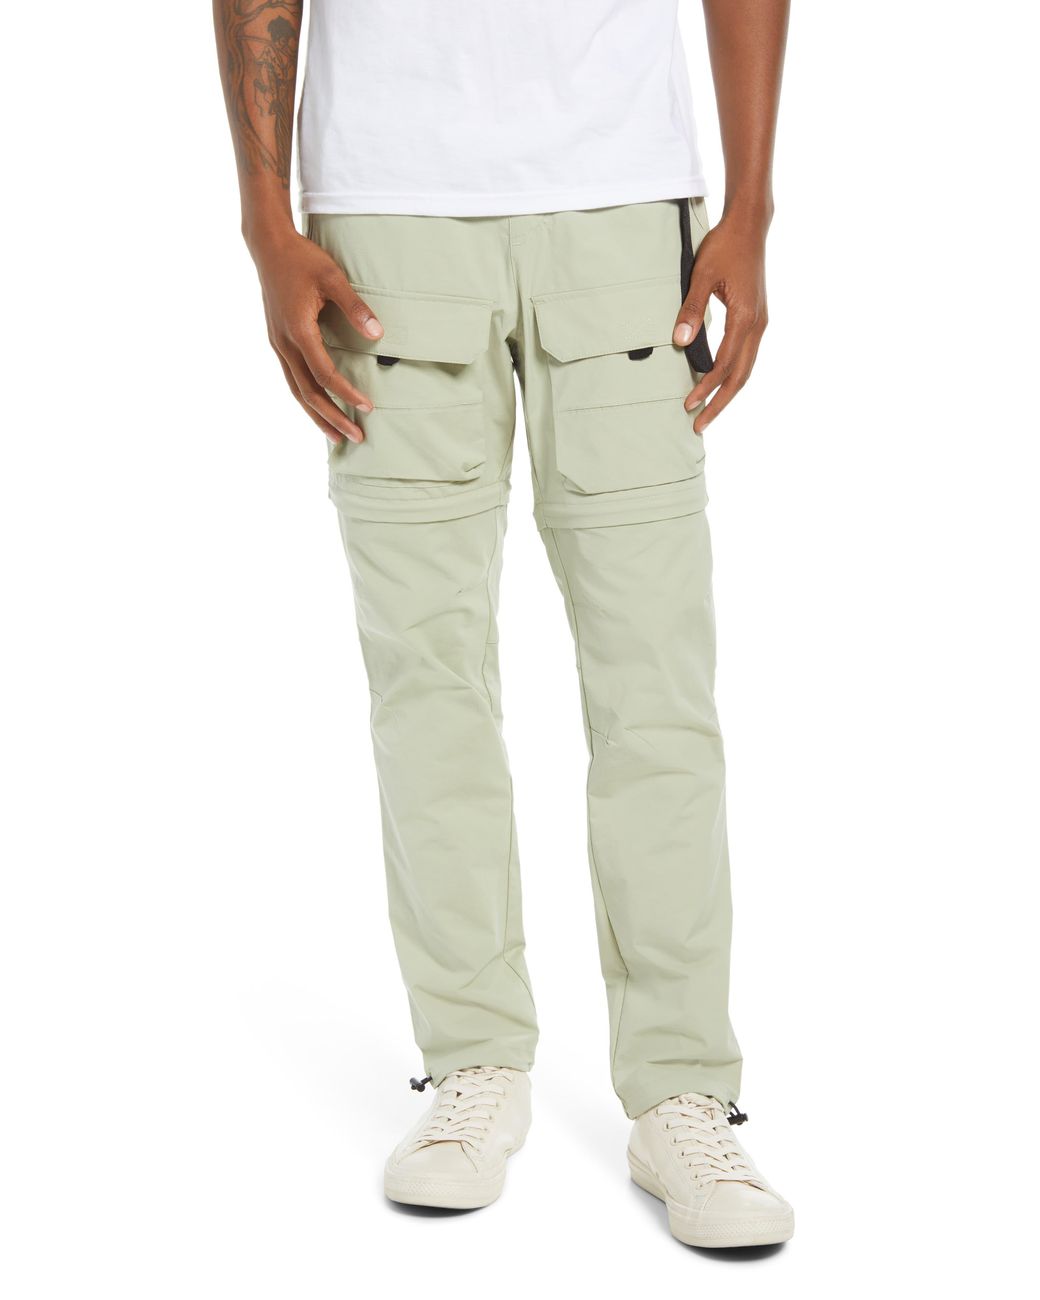 PacSun Men's Ronnie Zip-off Cargo Pants in Olive (Green) for Men - Lyst